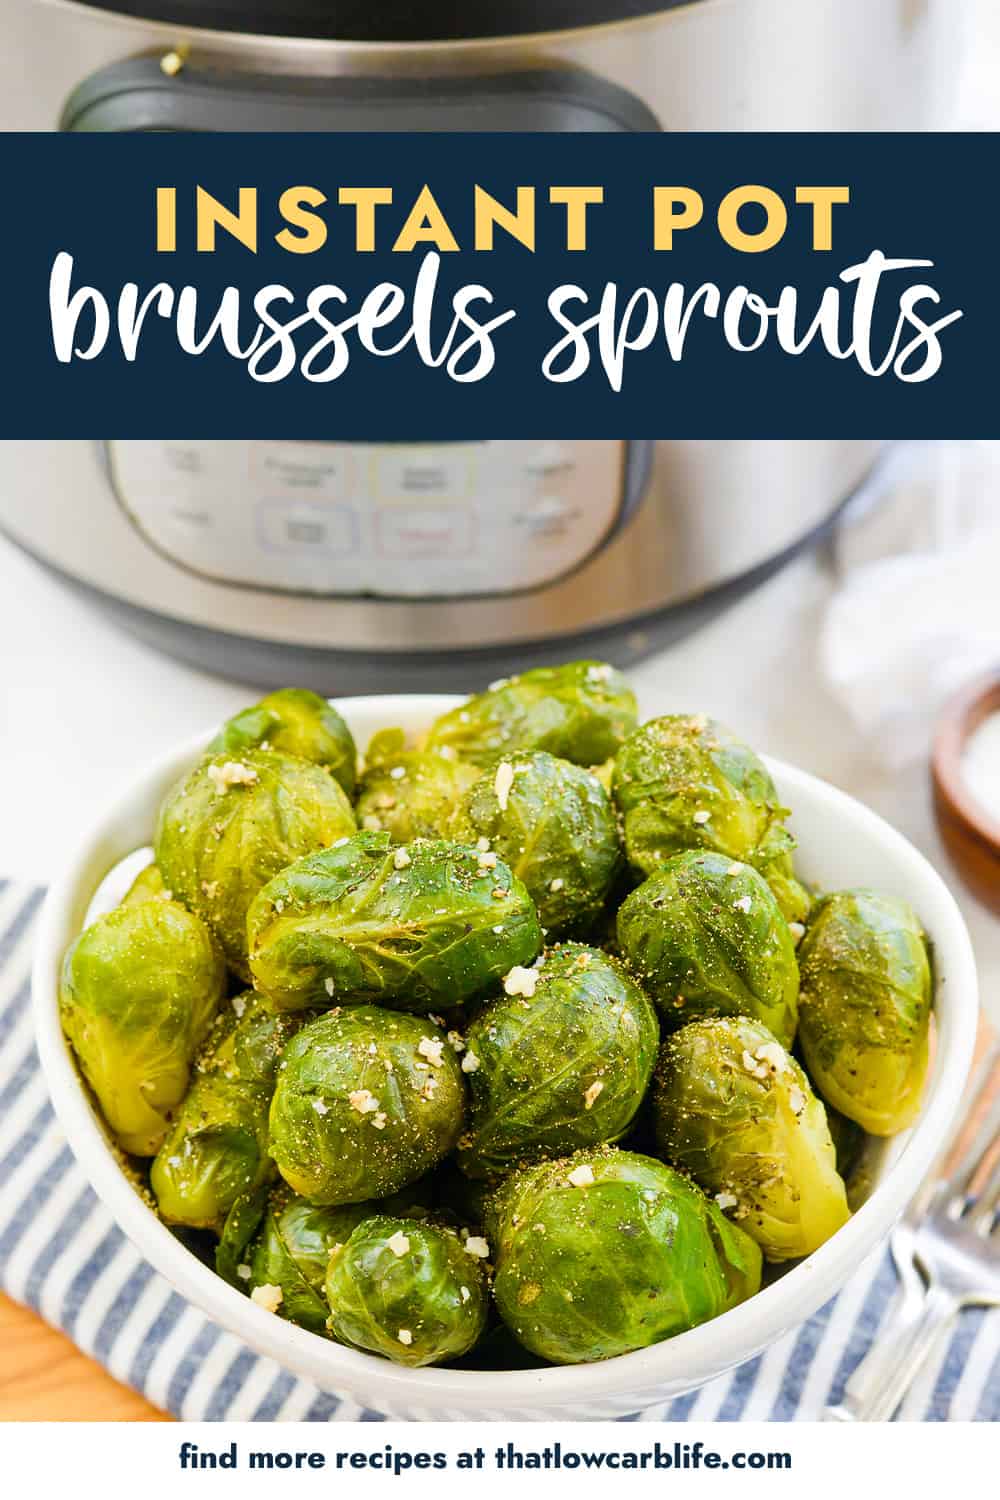 Bowl full of Brussels sprouts with text for PInterest.